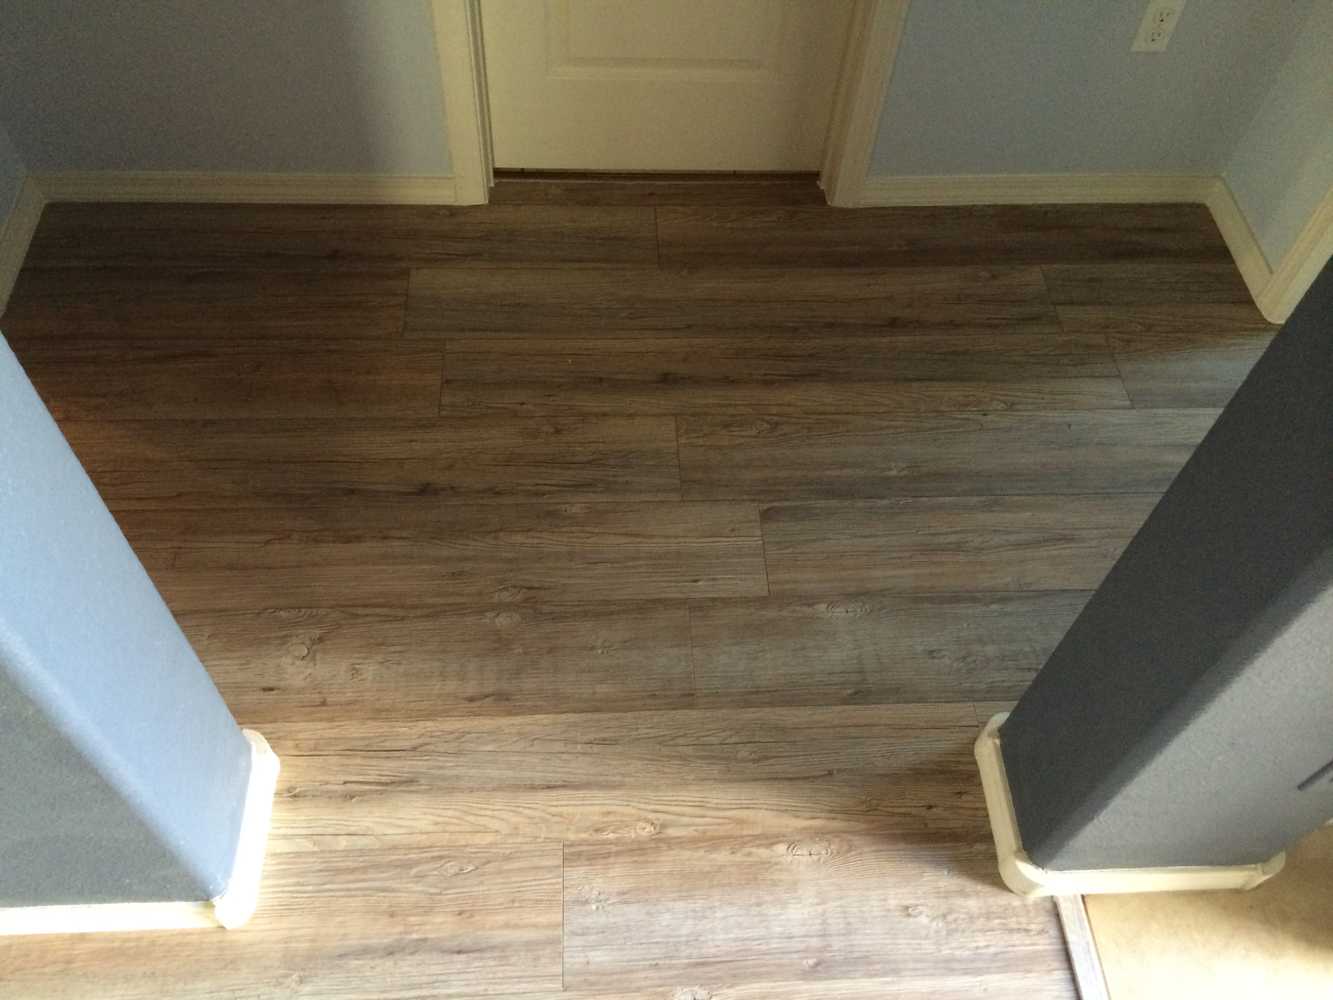 Photo(s) from Flooring Department Llc, The